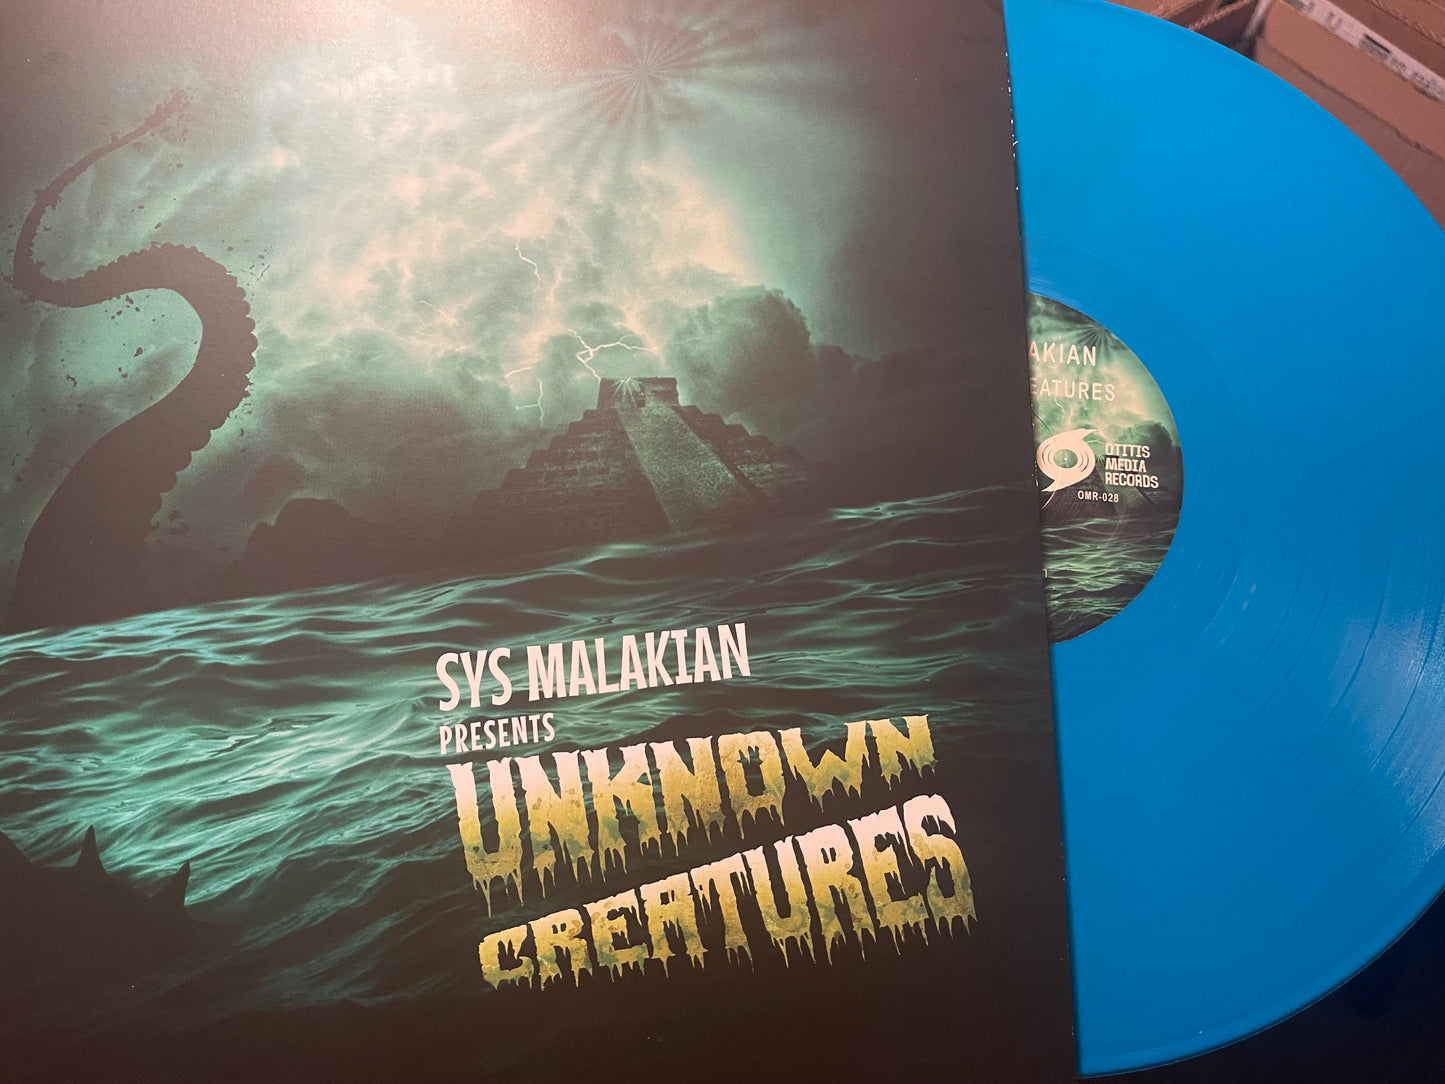 OMR-028 SYS MALAKIAN “Unknown Creatures” 12 inch Vinyl LP (Random Color)